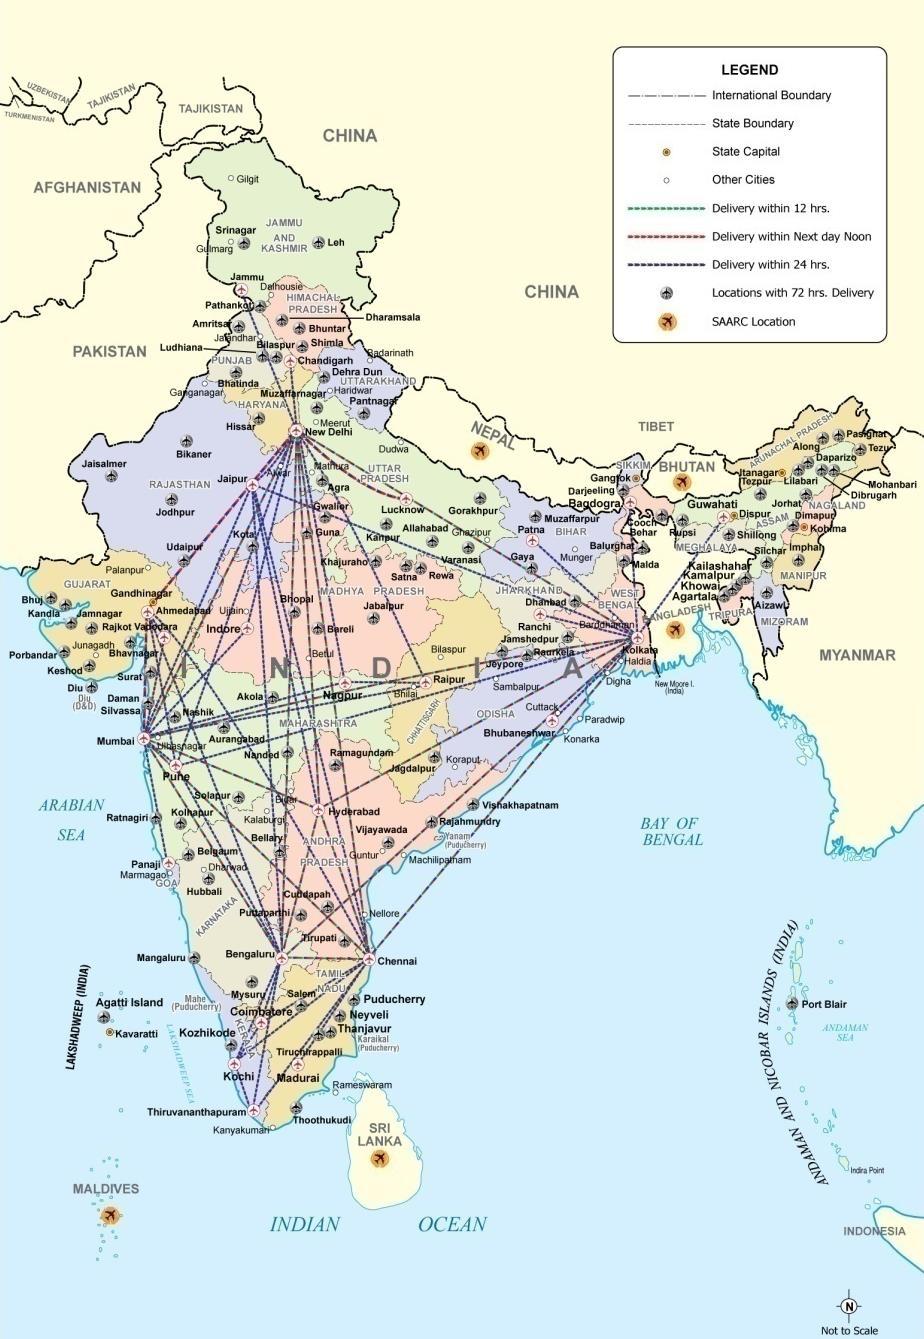 Our Air Network Direct Reach to 28 airports in India Seamless delivery to Tier 2